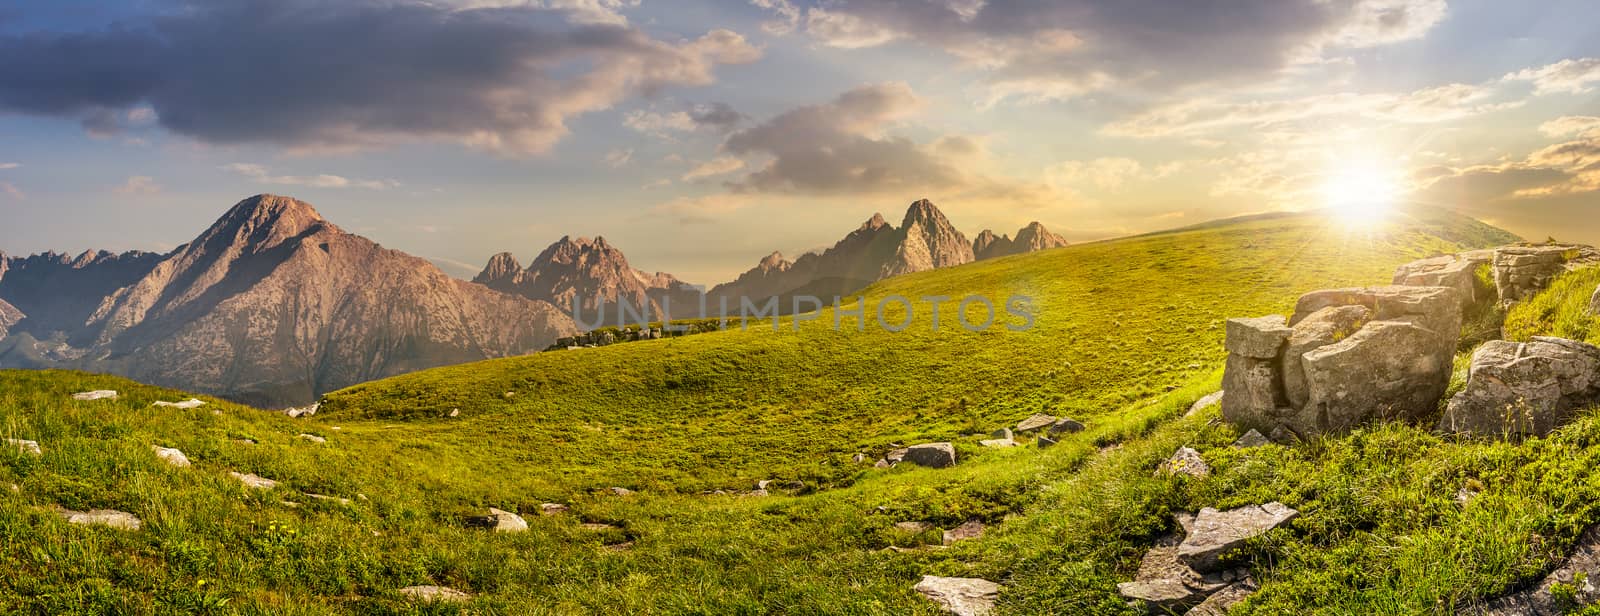 Hight Tatra mountain summer landscape. meadow with huge stones among the grass on top of the hillside near the peak of mountain range at sunset